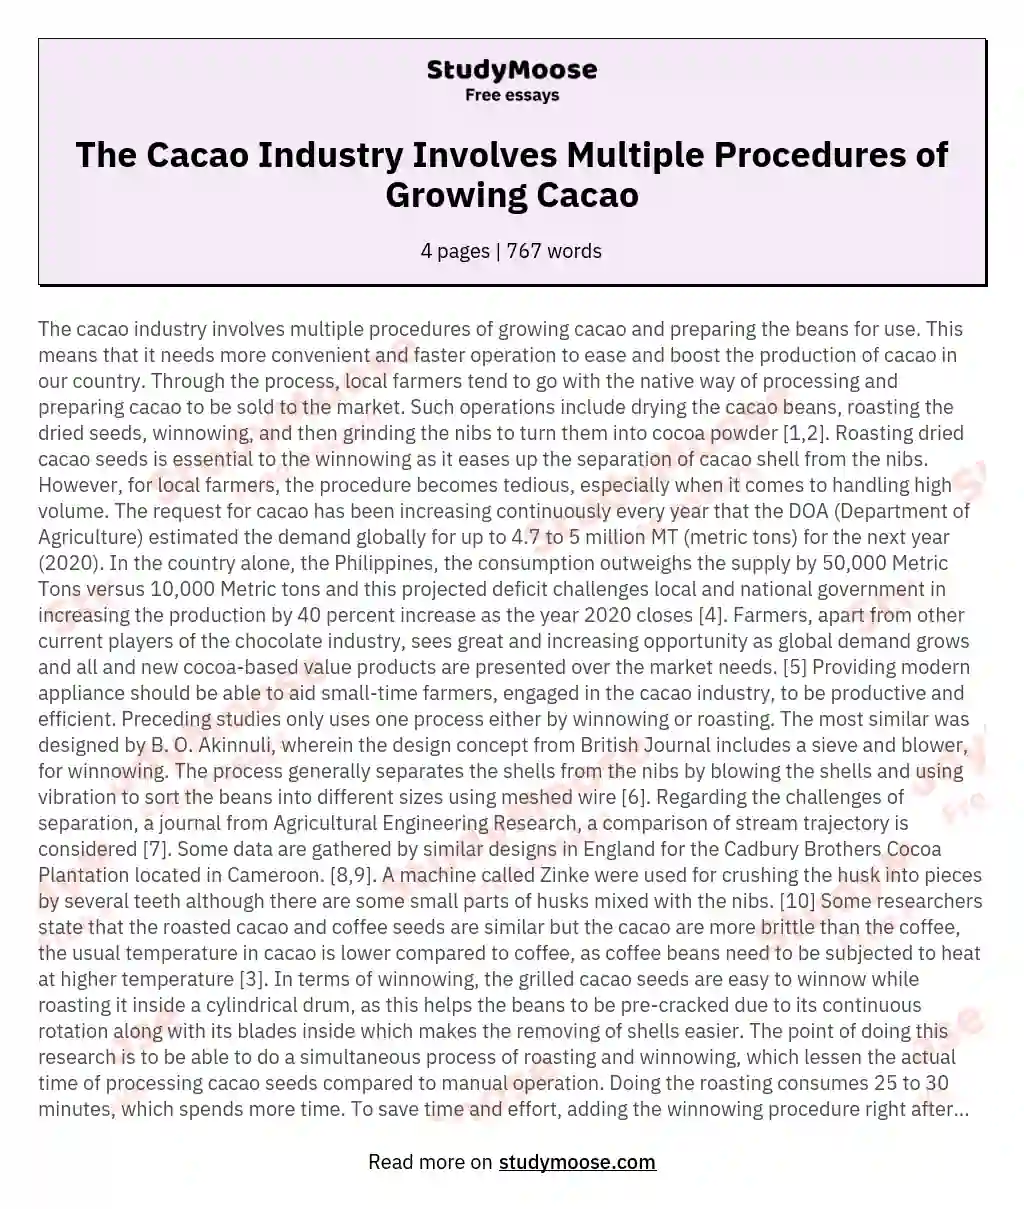 The Cacao Industry Involves Multiple Procedures of Growing Cacao essay